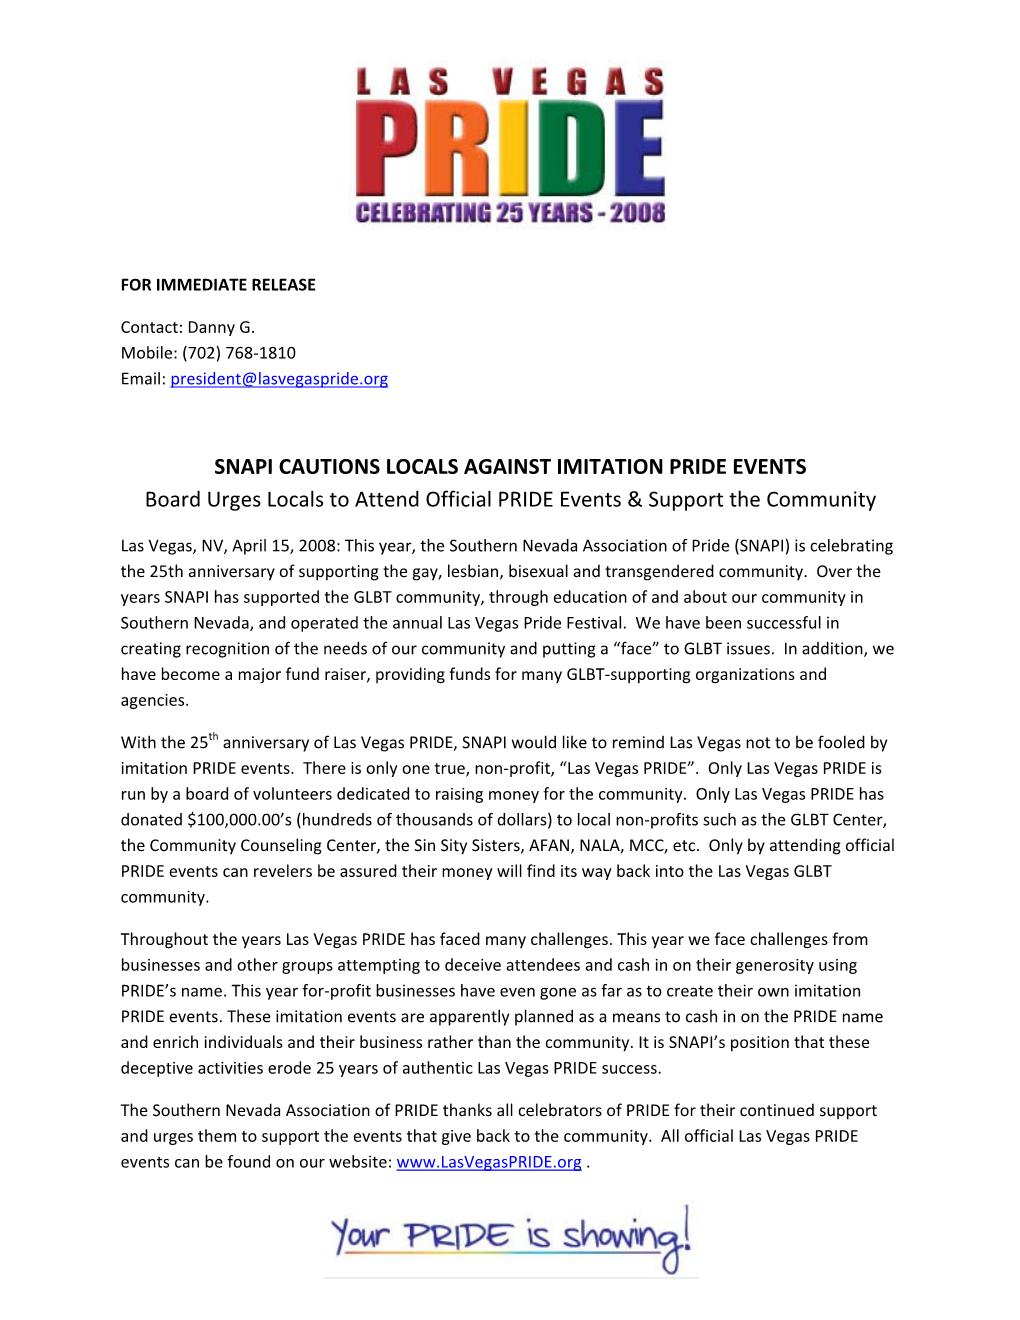 SNAPI CAUTIONS LOCALS AGAINST IMITATION PRIDE EVENTS Board Urges Locals to Attend Official PRIDE Events & Support